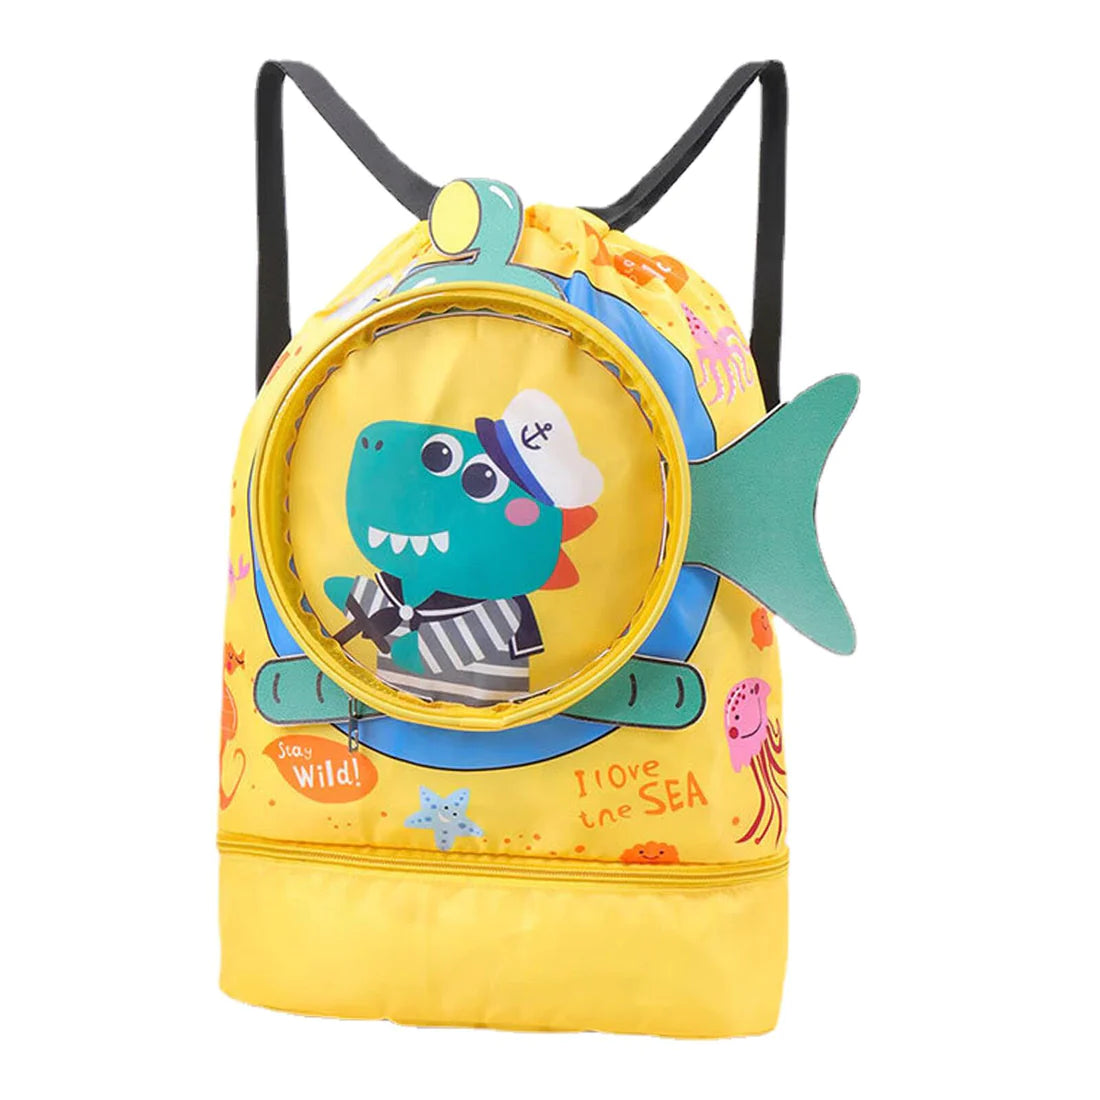 Dino and Unicorn Themed Swimming Backpack - Perfect for The Pool or Beach